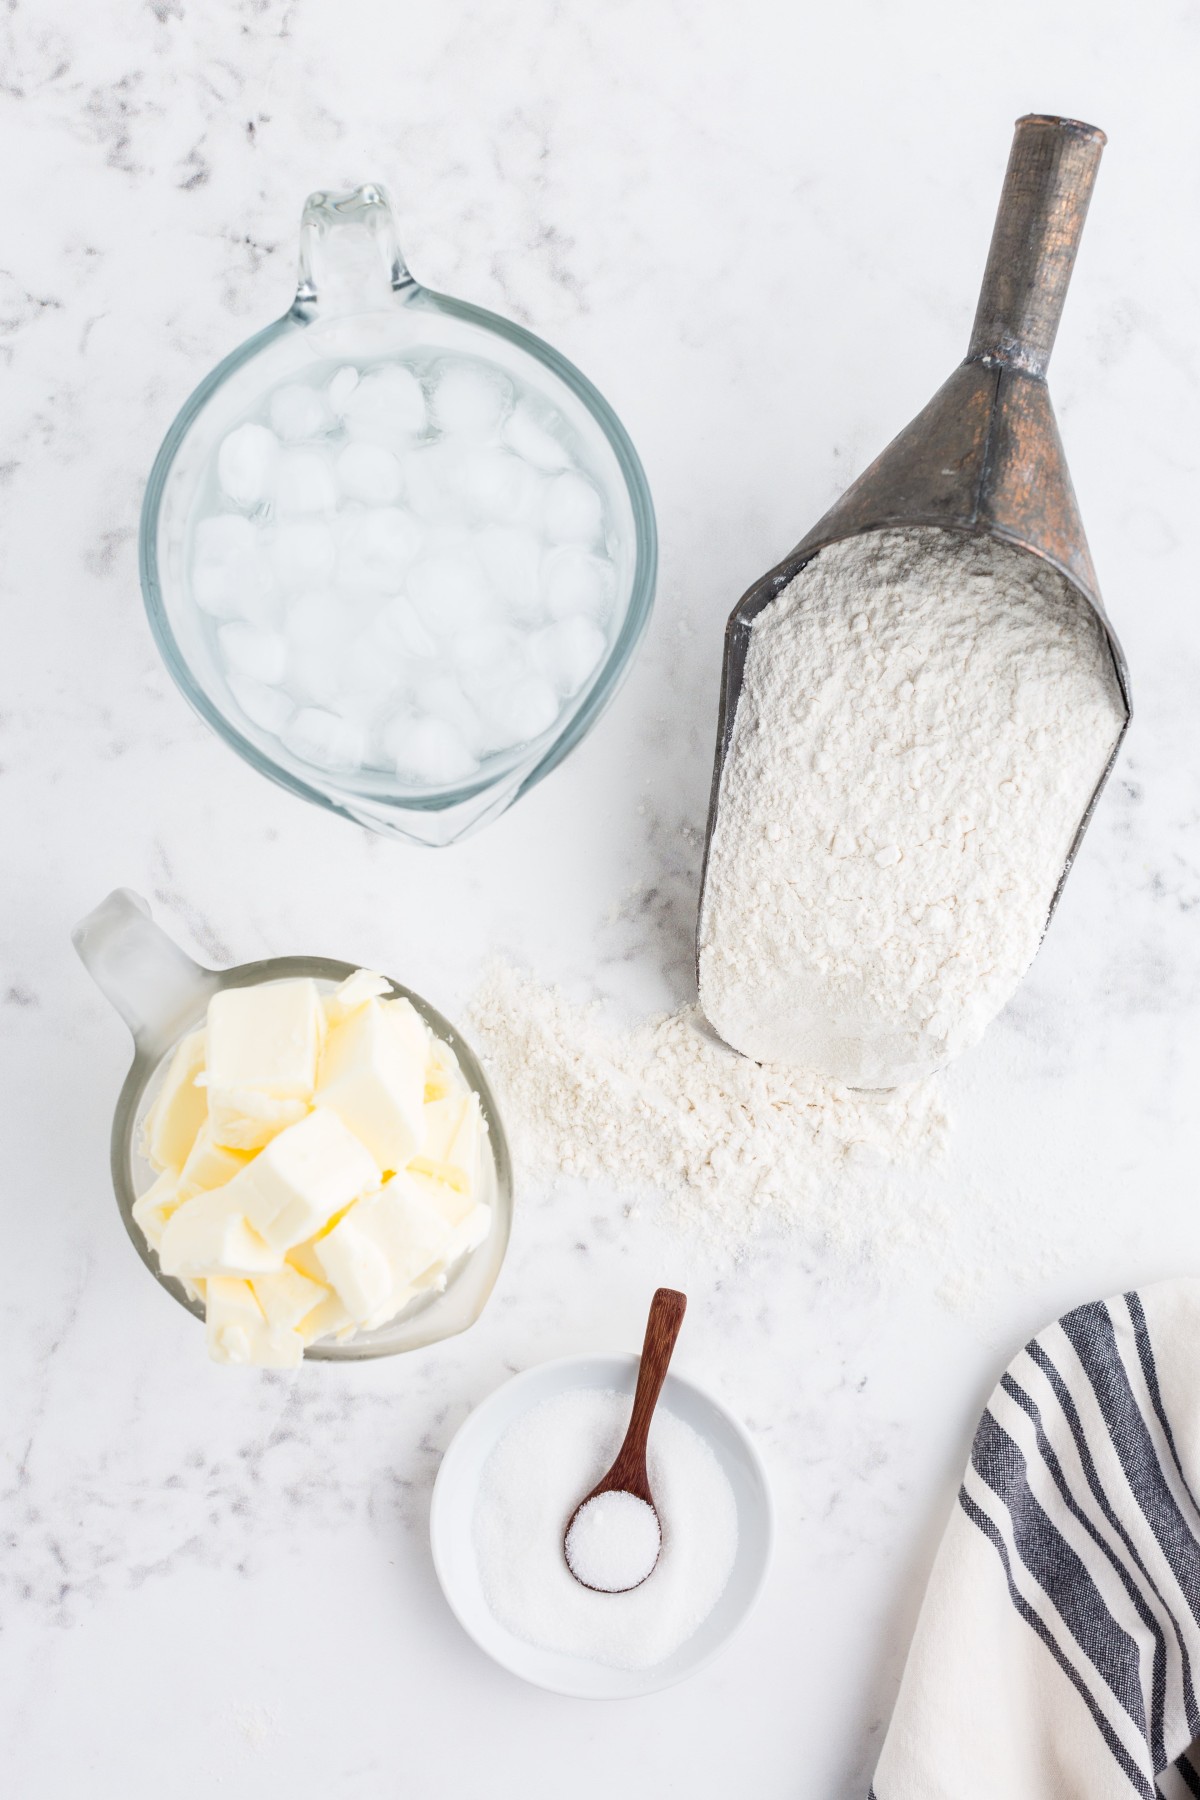 Glass pitcher with iced water, glass jug with butter cubes, bowl with salt, shovel with flour, grey and white striped linen on a marble countertop